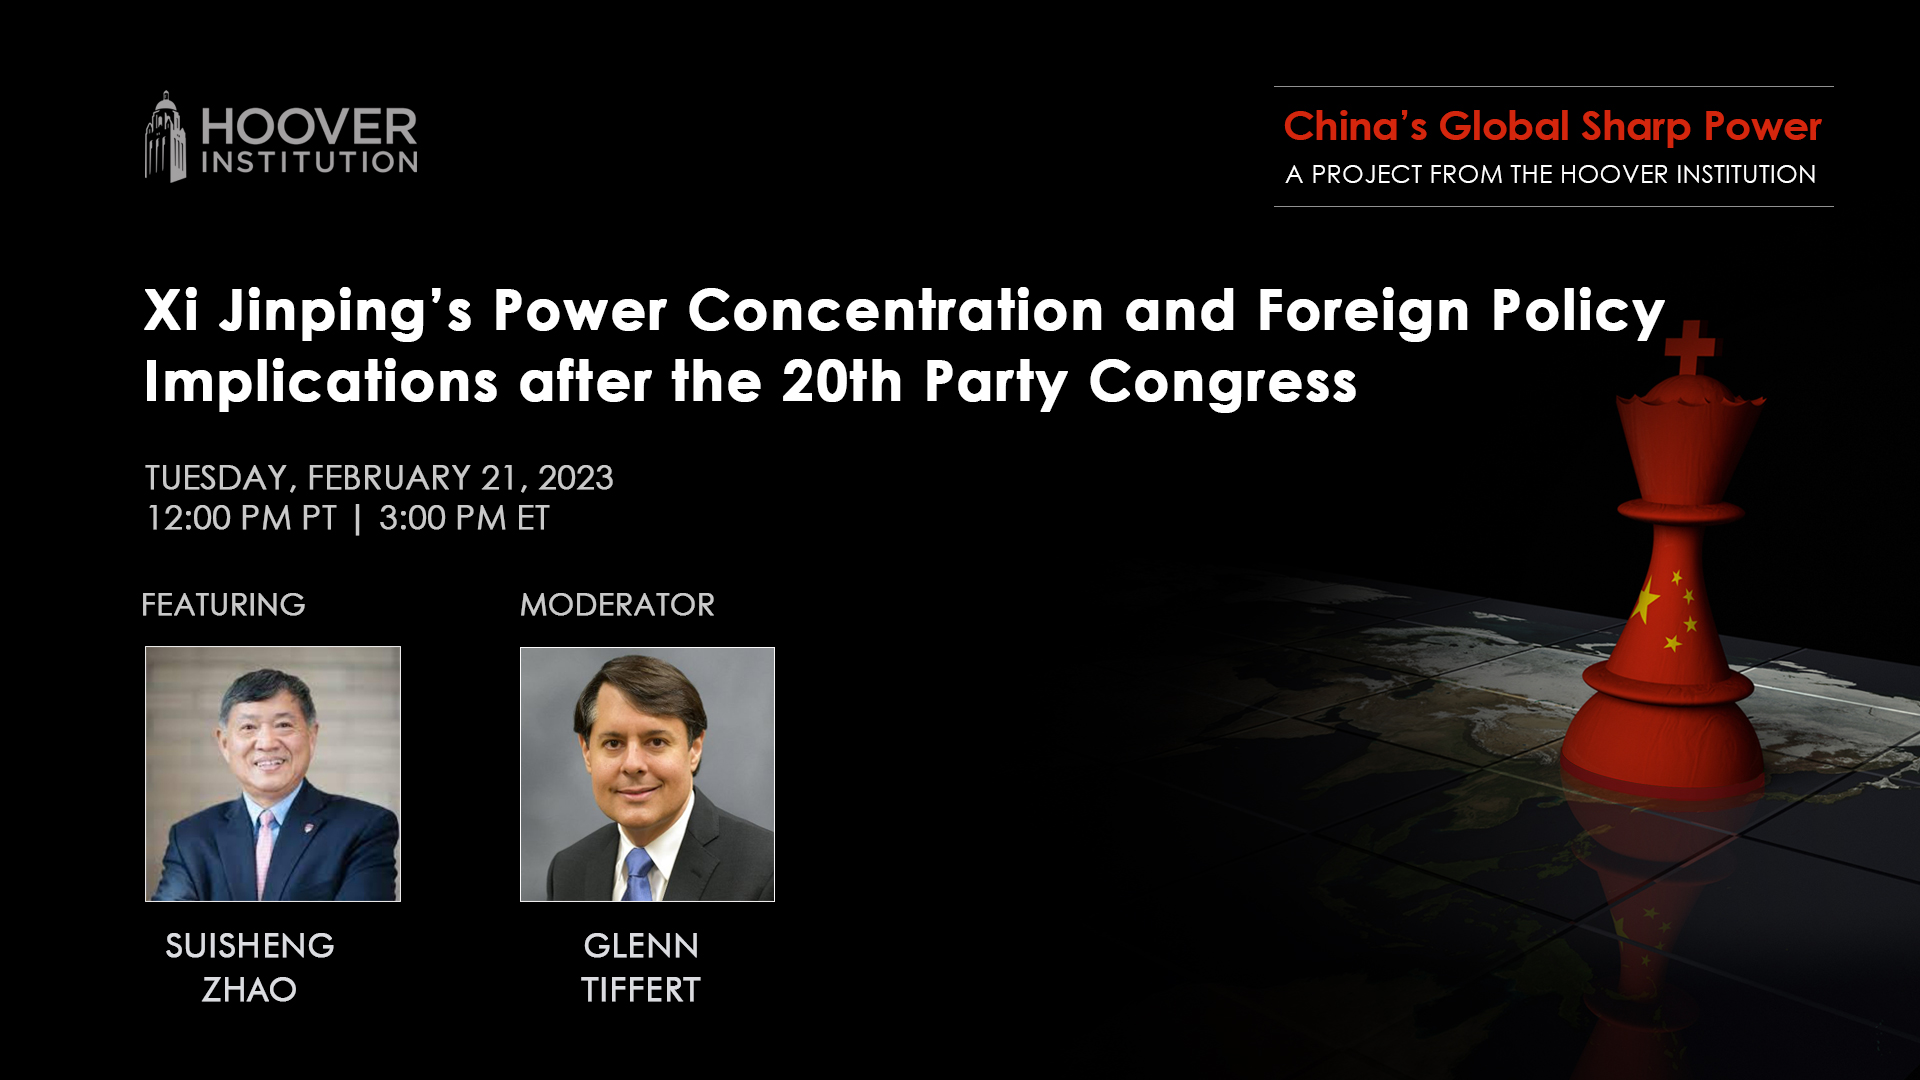 Xi Jinping’s Power Concentration and Foreign Policy Implications after the 20th Party Congress